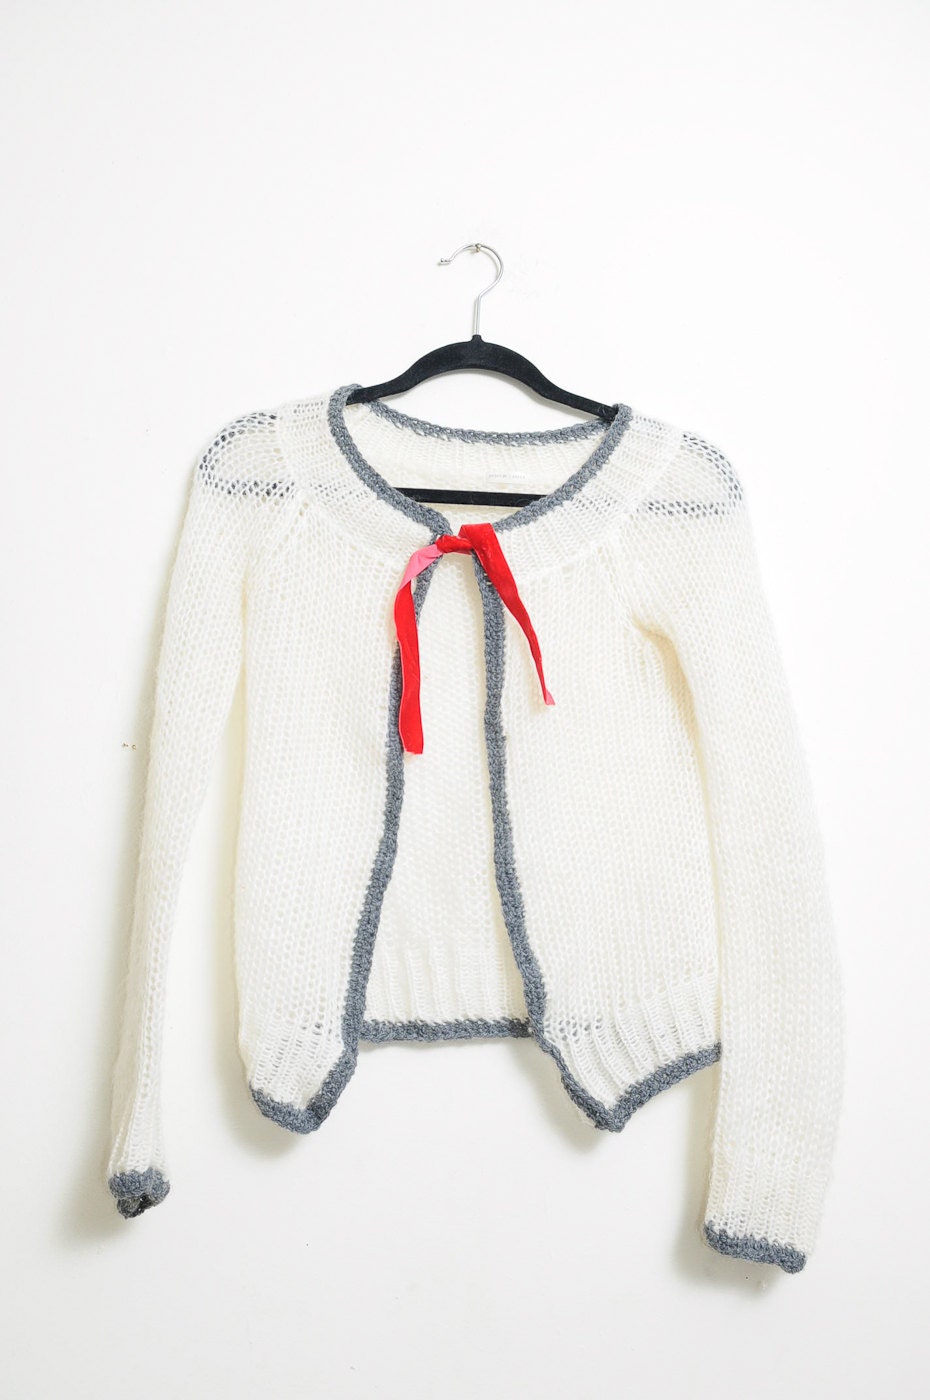 Super Cute Vintage 80s/90s Knit Off White and Grey Cardigan Sweater With Small Red Velvet Ribbon In Front - LipstickDinosaur